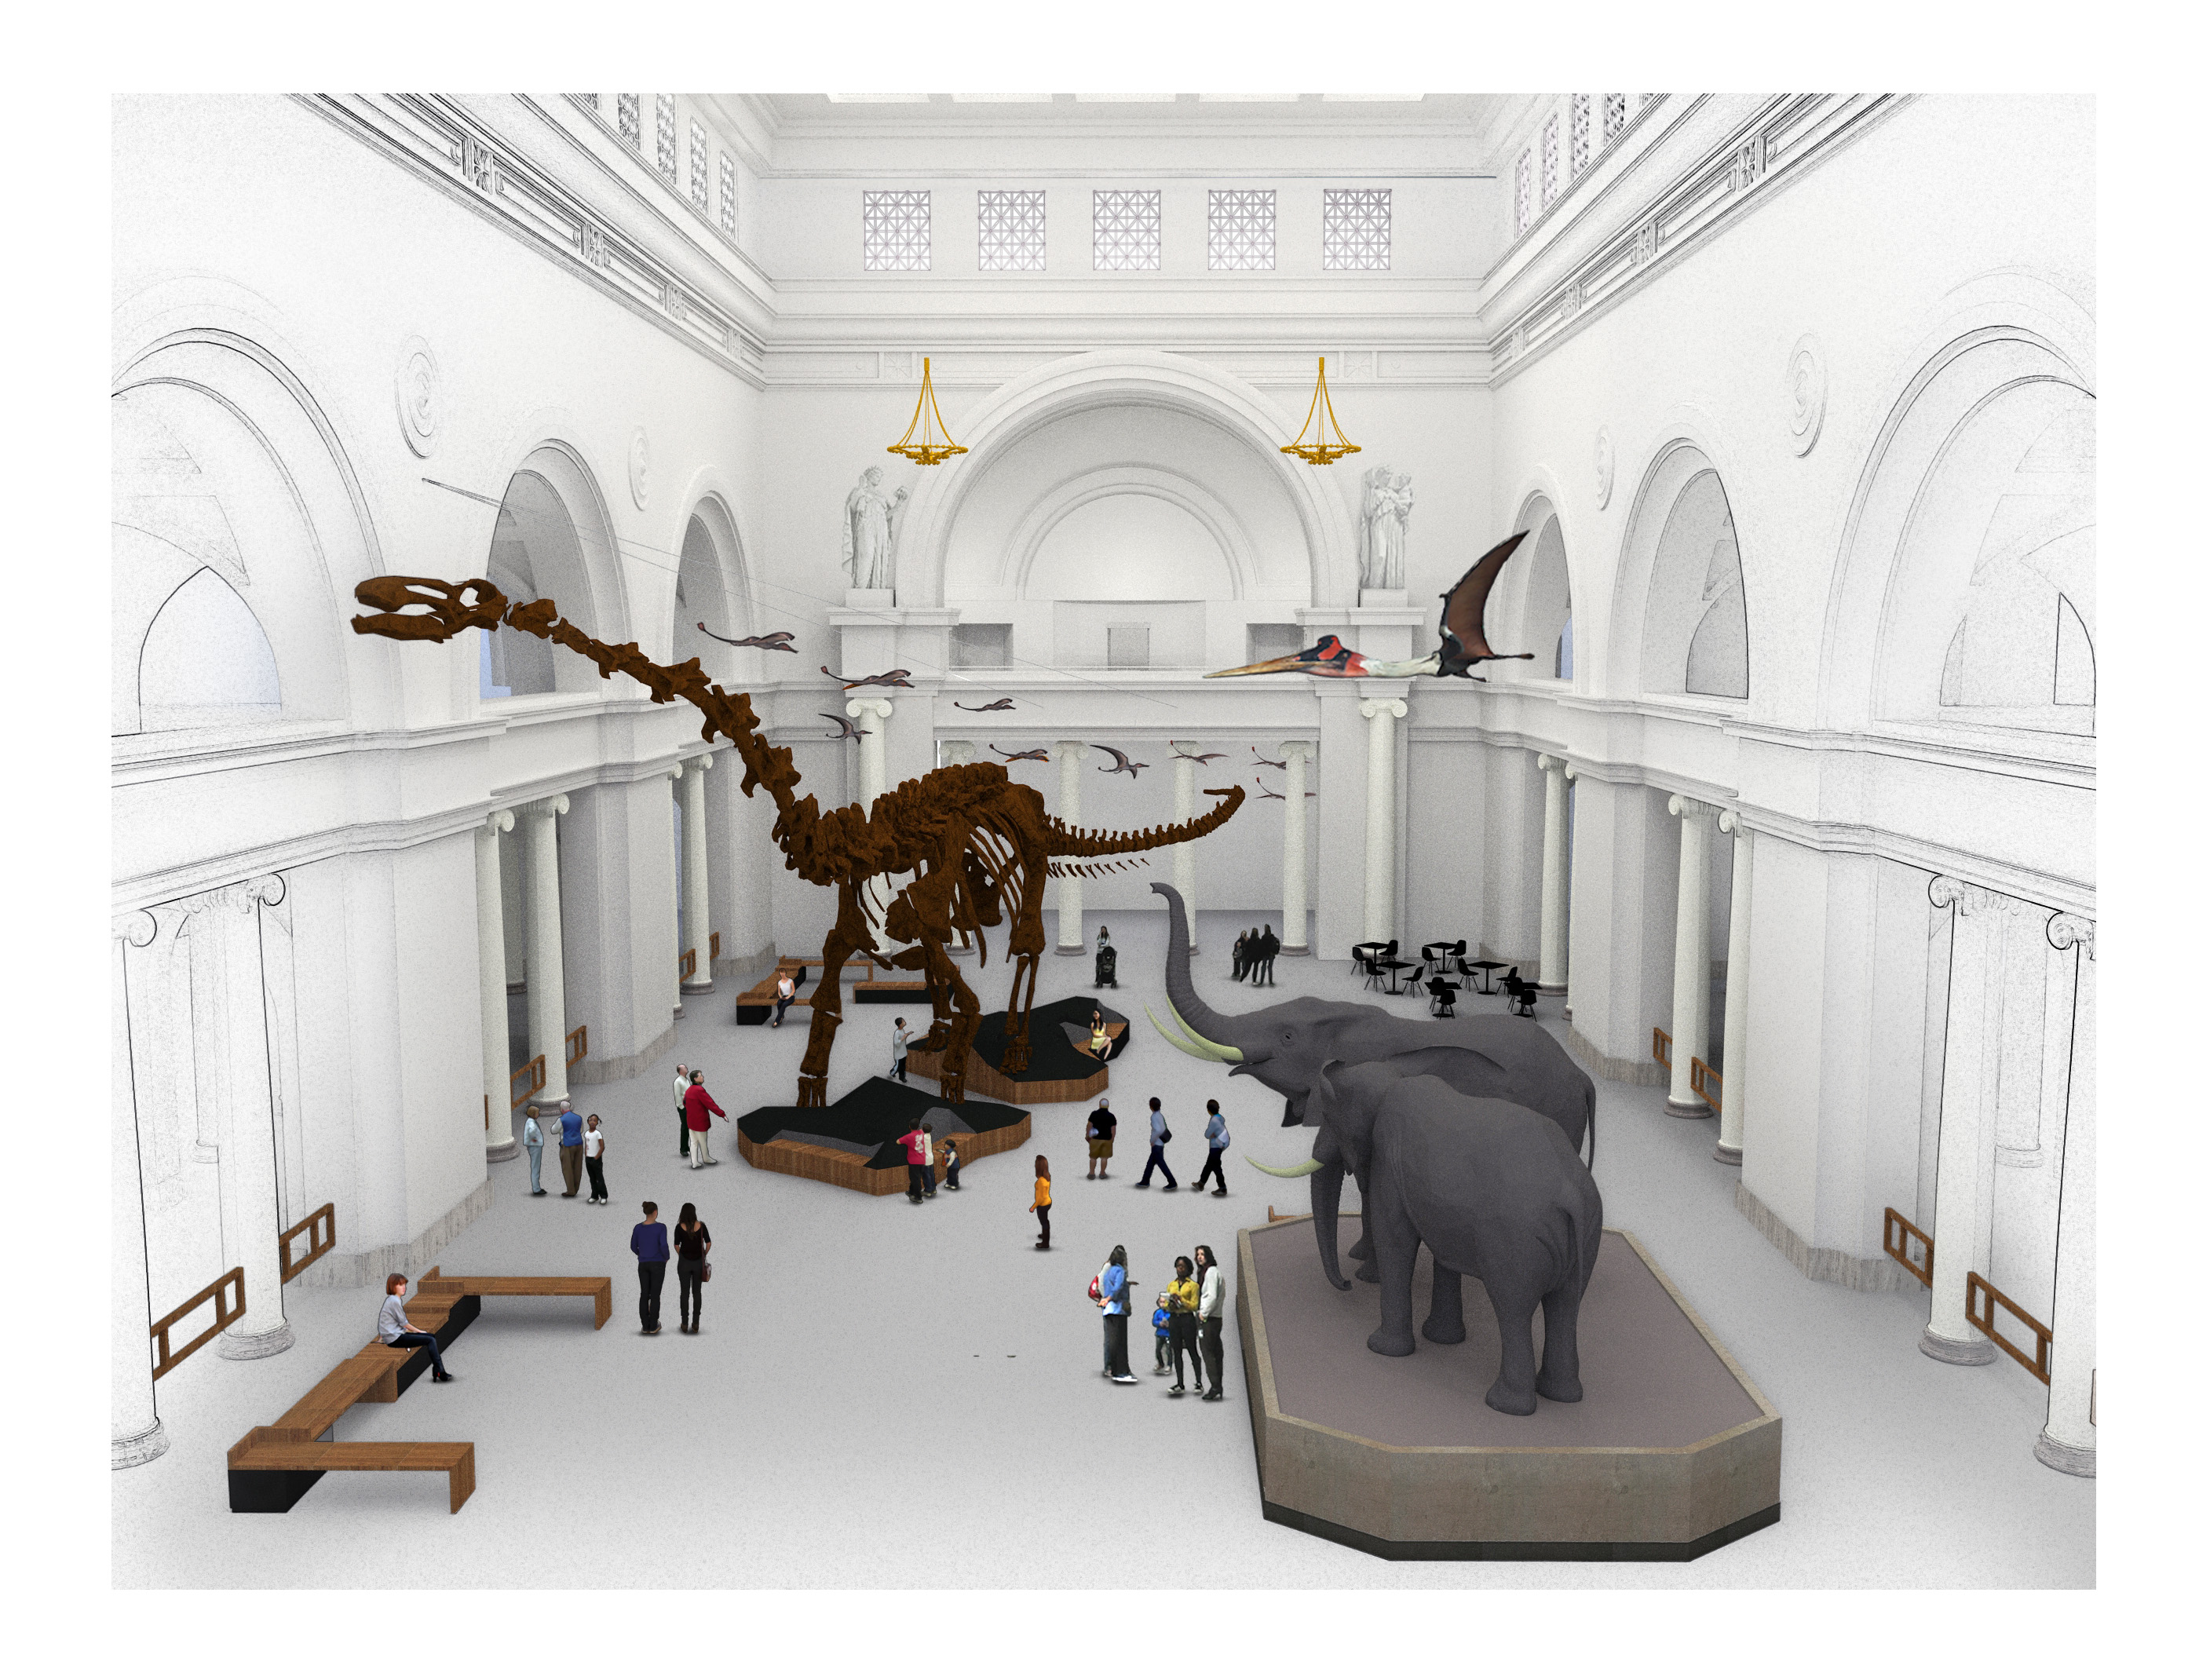 Chicago's Field Museum to unveil flying reptiles and world's largest dinosaur